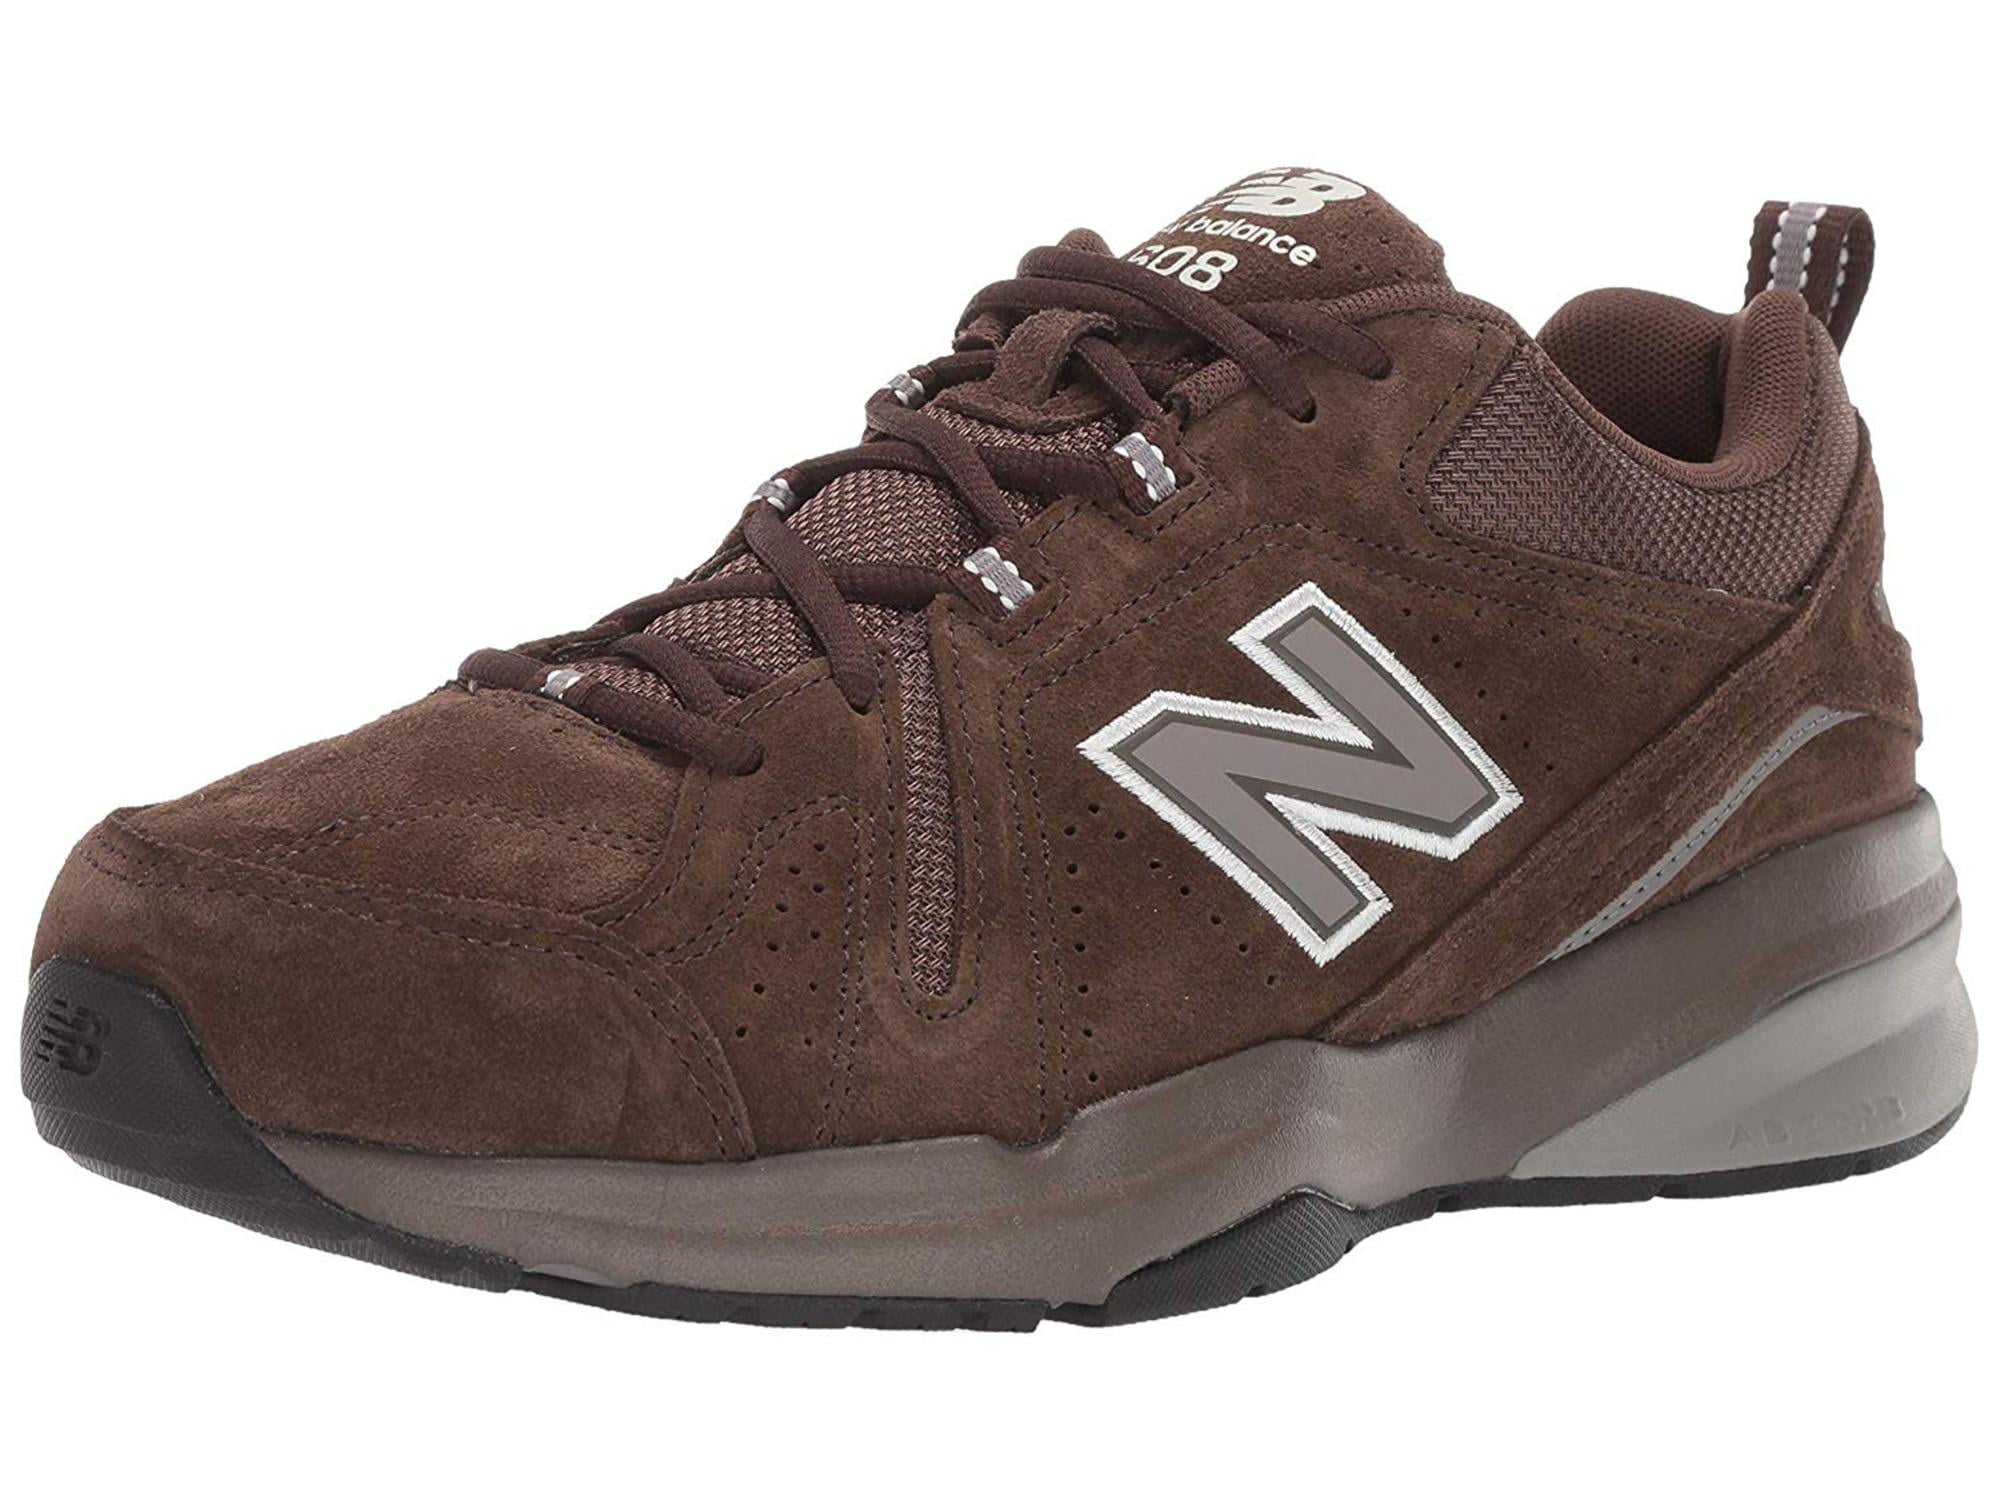 New Balance - New Balance Mens Mx608 Low Top Lace Up Walking Shoes ...